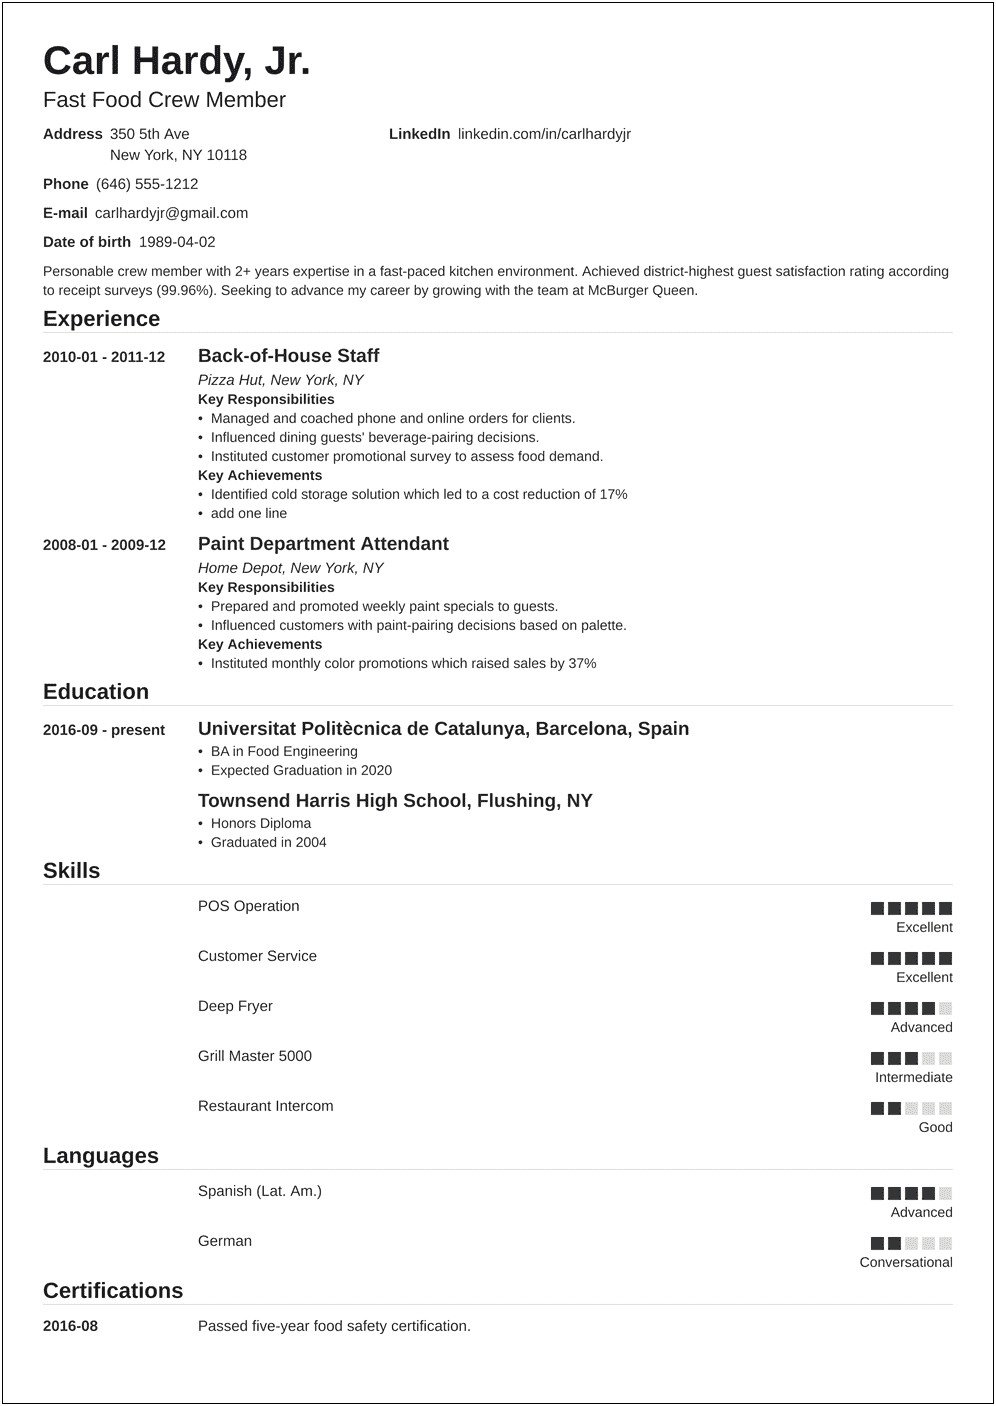 Resume Objective Examples For Fast Food Cashier